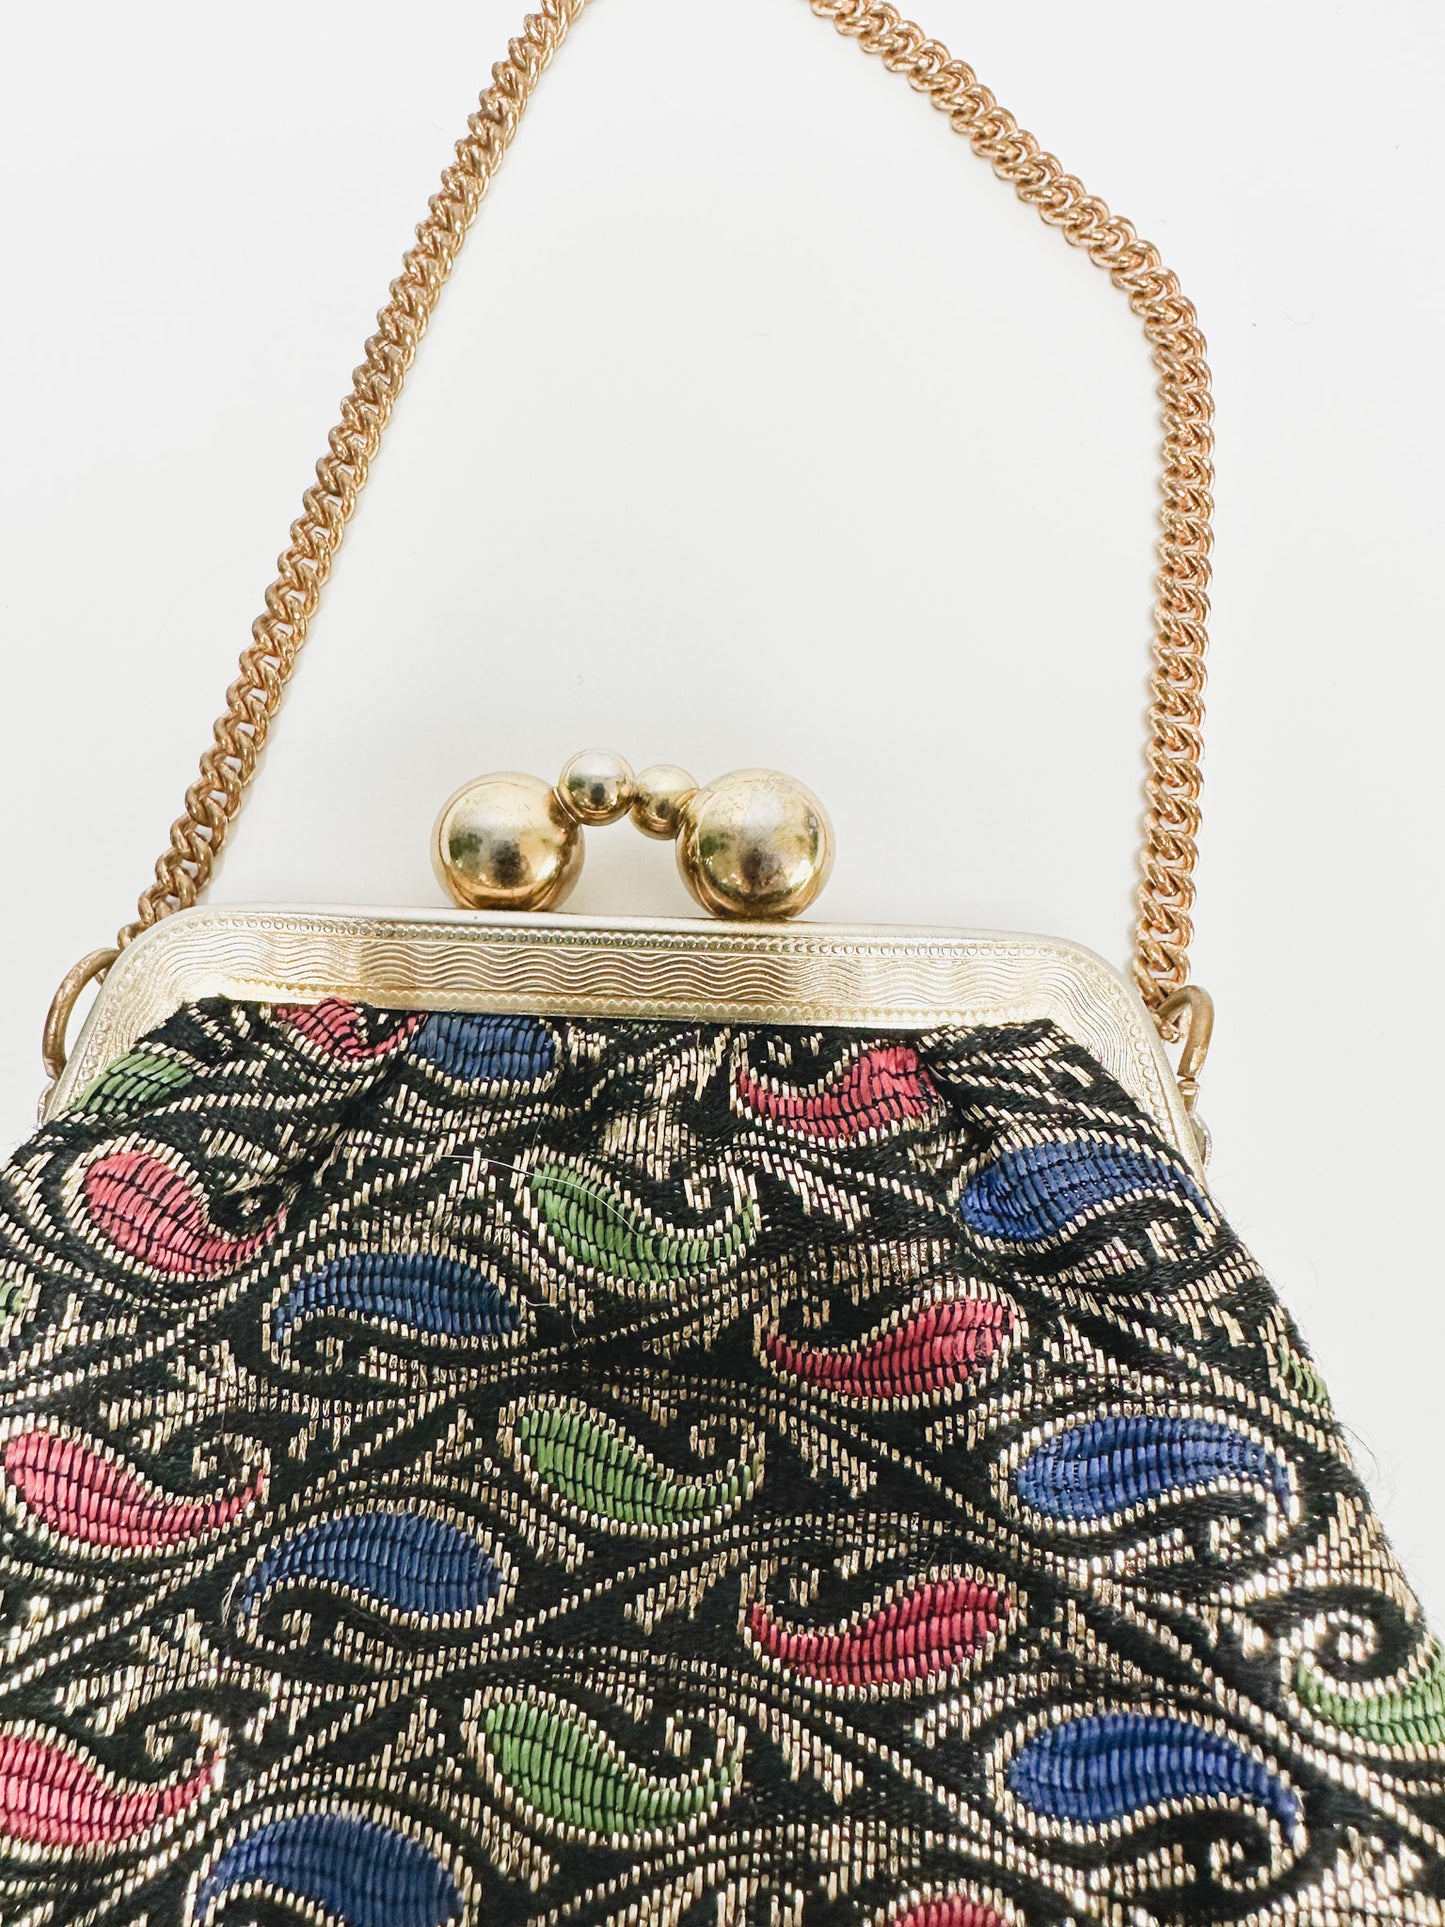 Vintage Paisley Print cocktail/Evening Purse with Gold Hardware